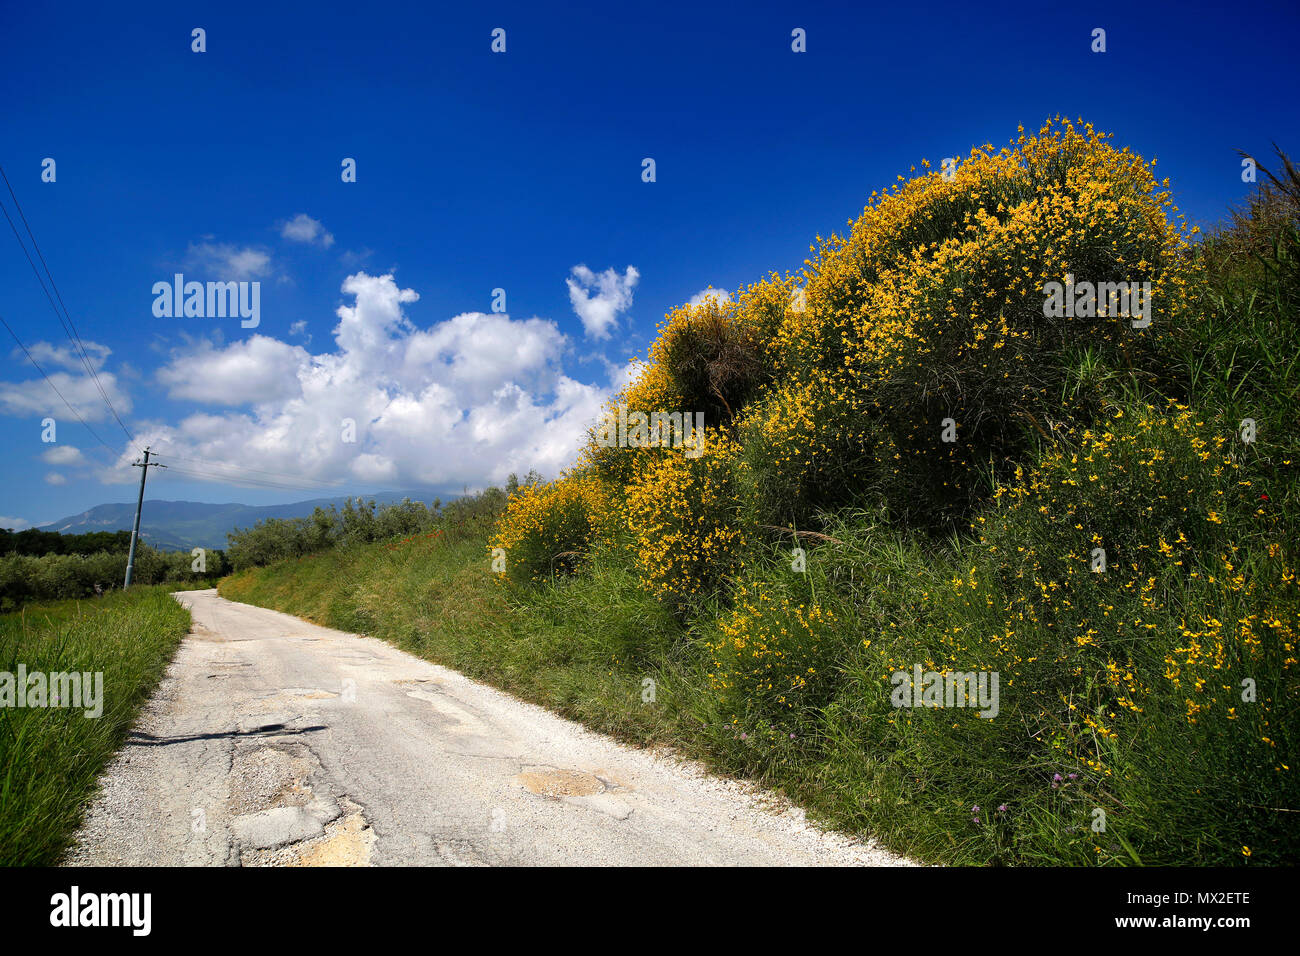 San Vincenzo, Italy. Roadside wild broom against a blue sky with clouds. Stock Photo